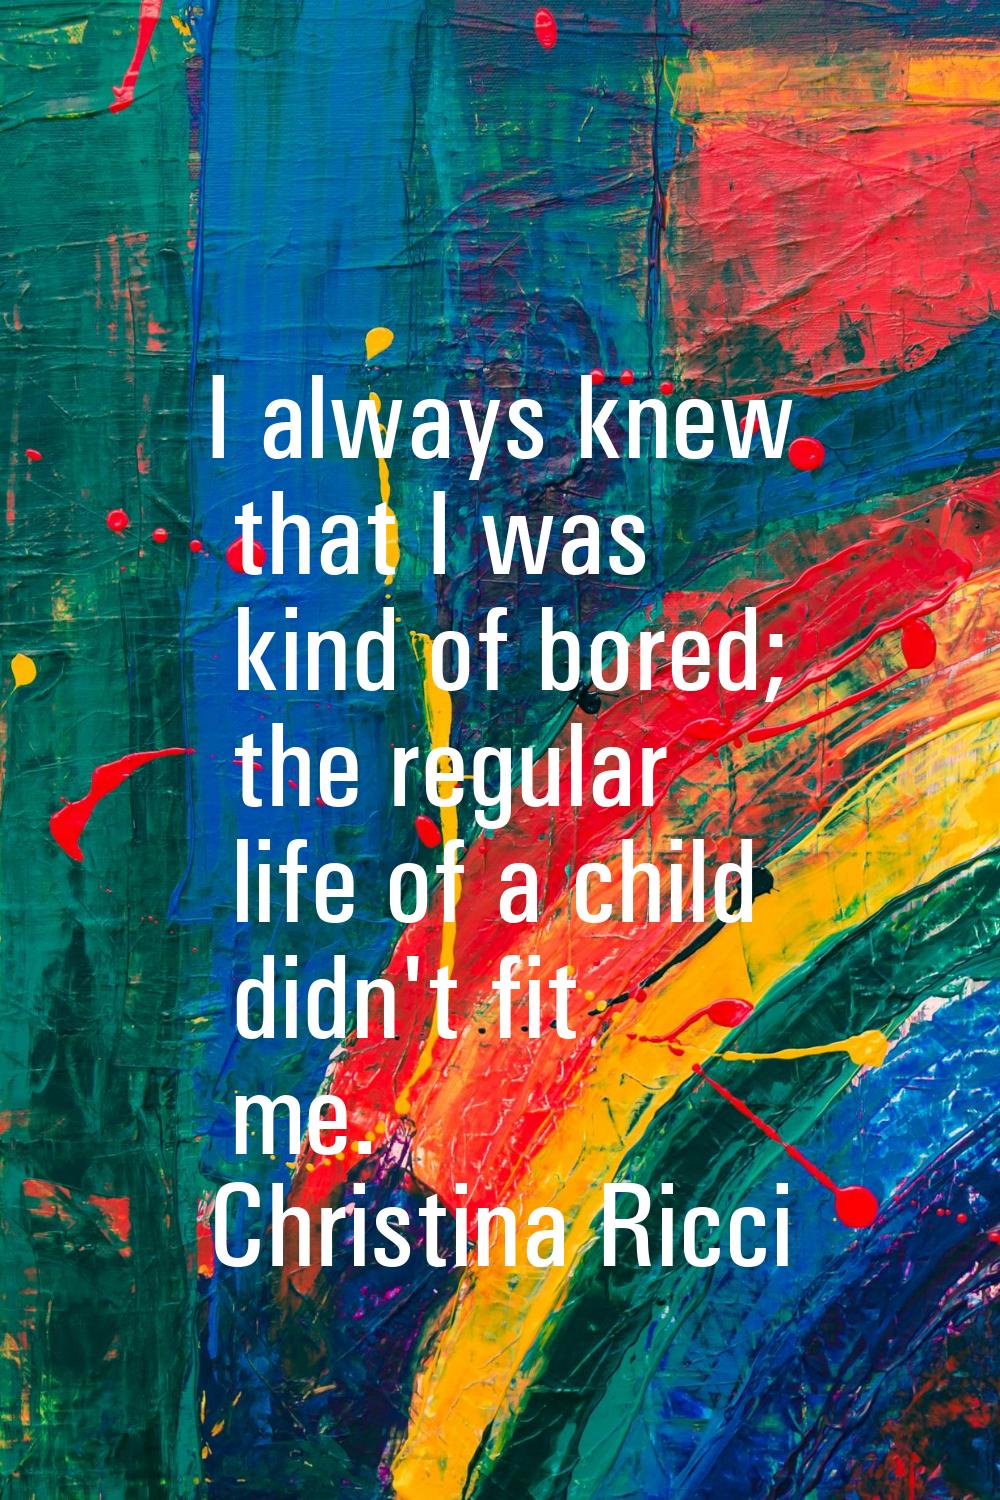 I always knew that I was kind of bored; the regular life of a child didn't fit me.